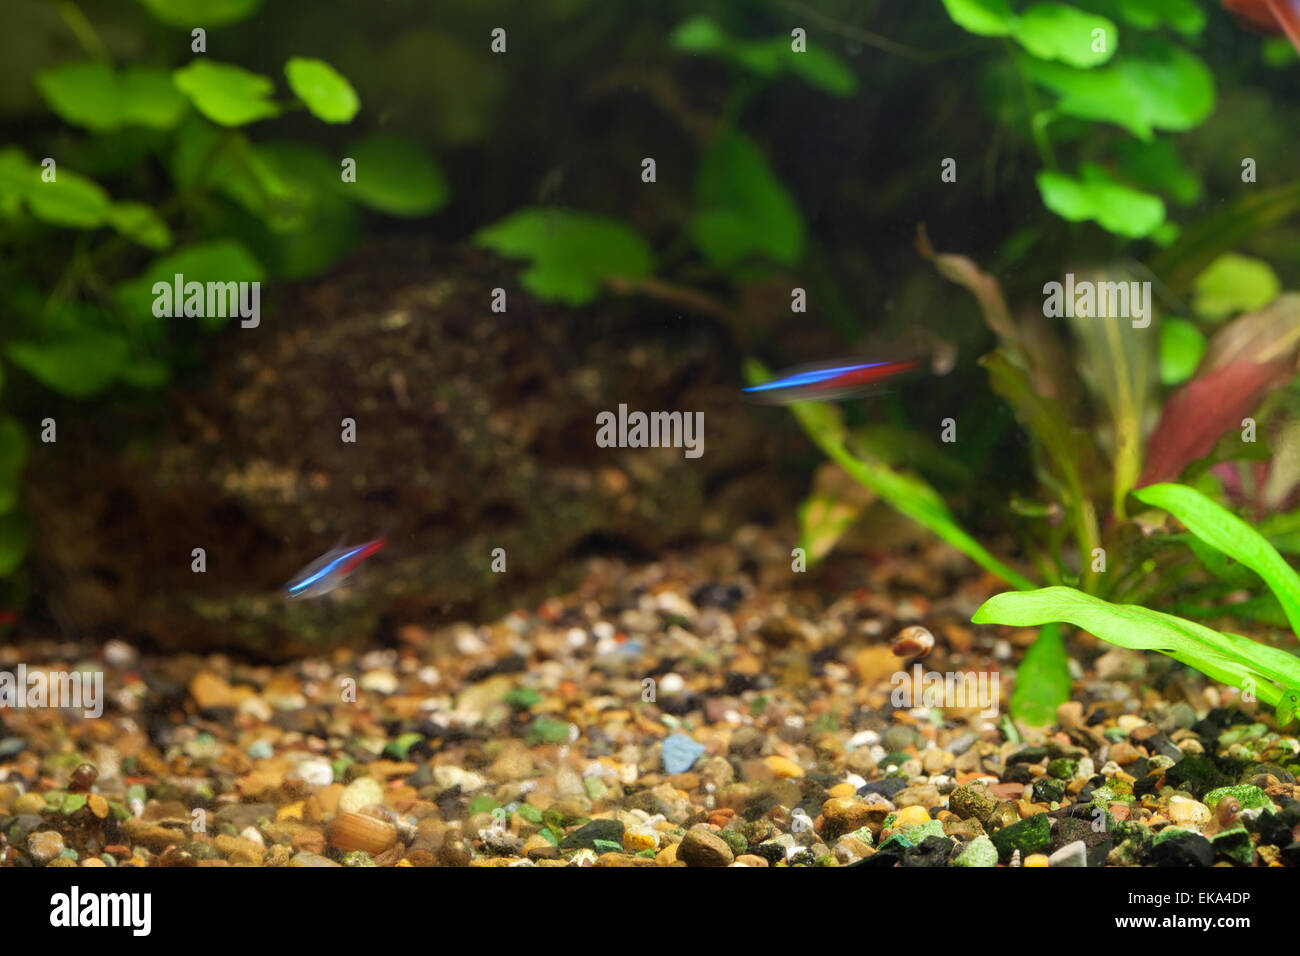 background of the aquarium with green plants Stock Photo